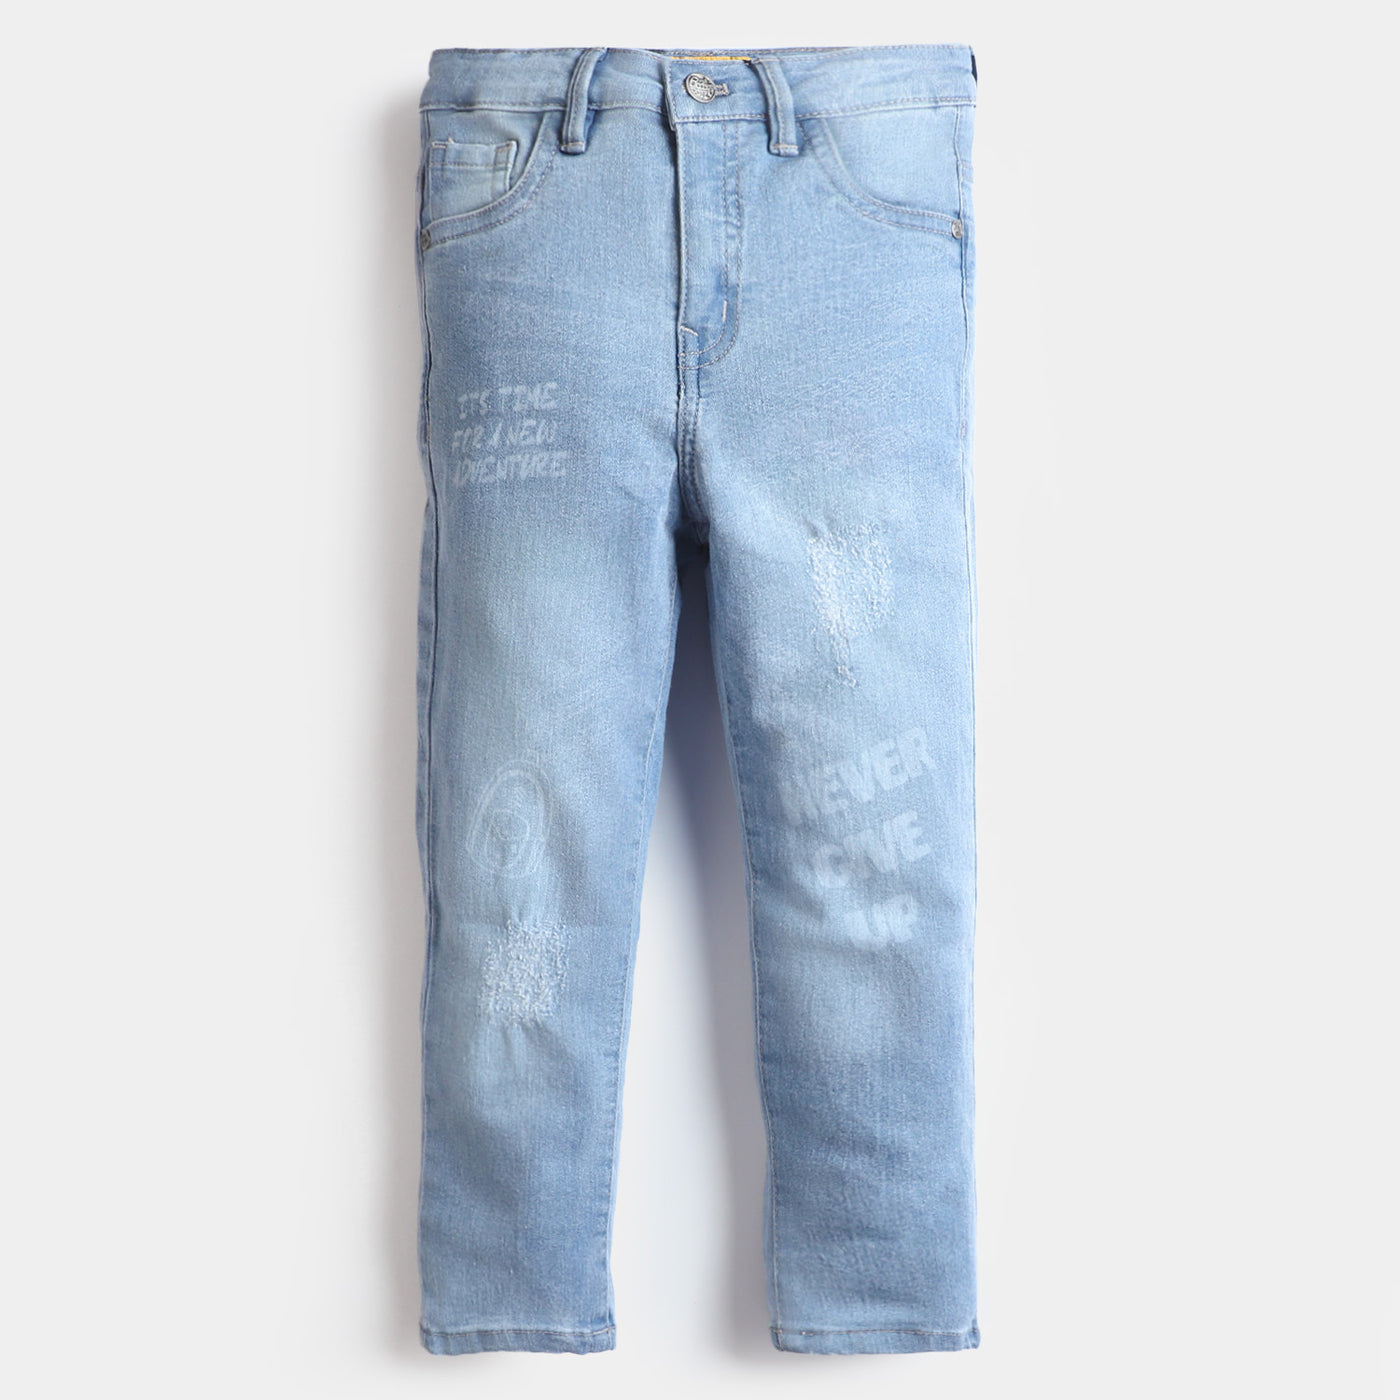 Boys Denim Pant Never Give Up-Ice Blue